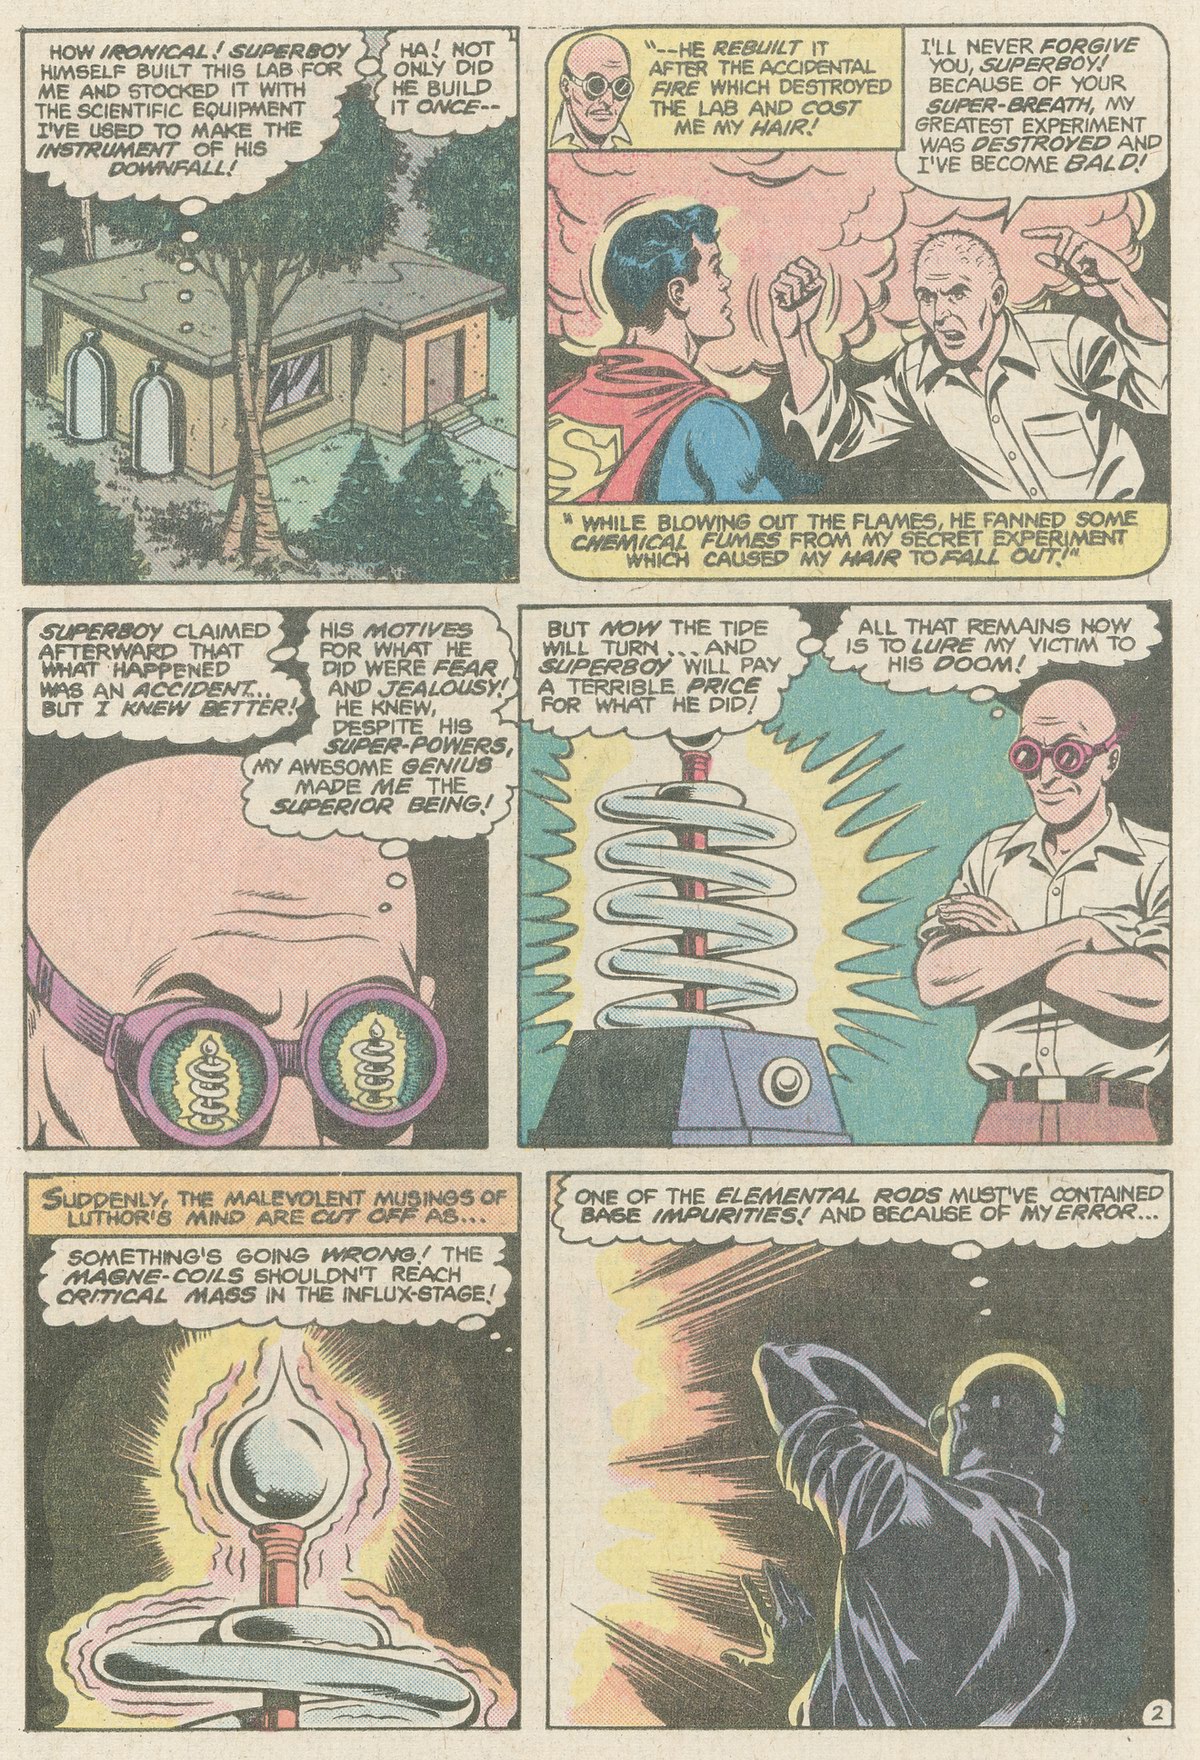 The New Adventures of Superboy 11 Page 2